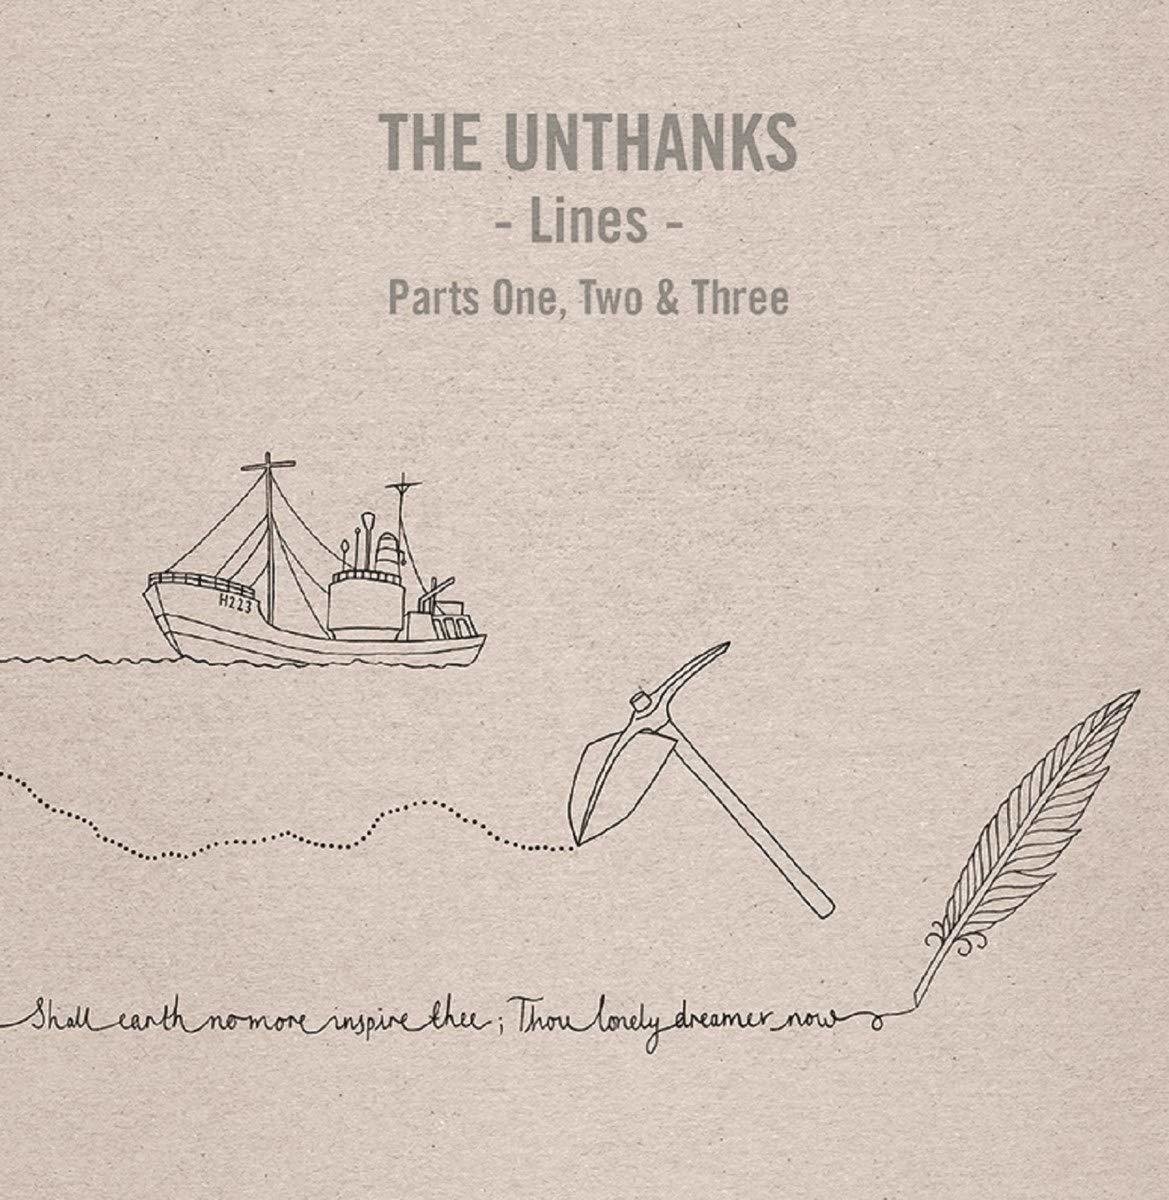 LP deska The Unthanks - Lines - Parts One, Two And Three (3 x 10" Vinyl)